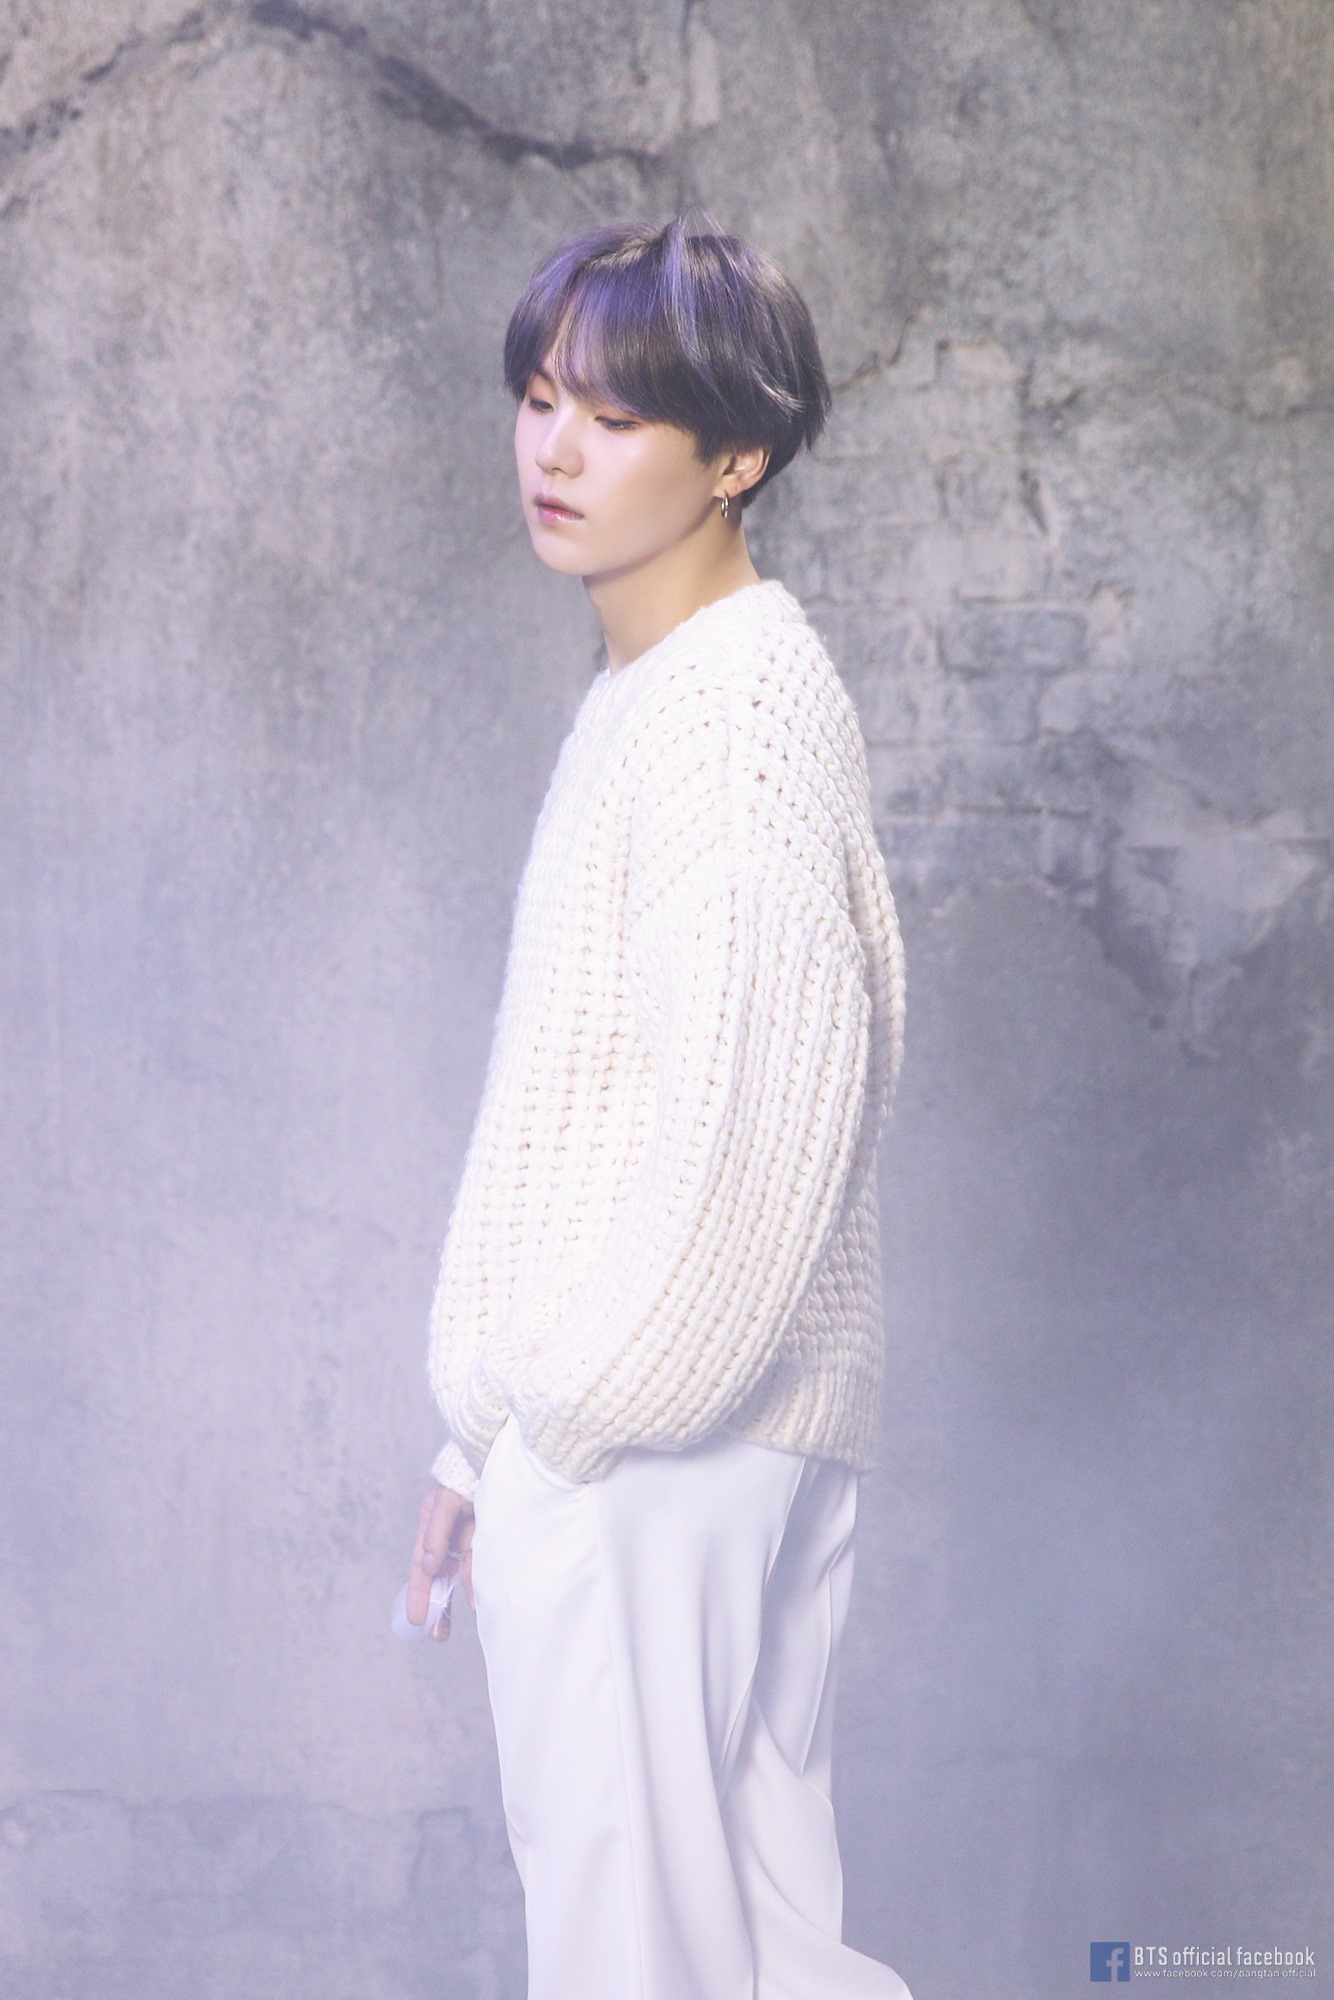 BTS SUGA MAP OF THE SOUL : 7